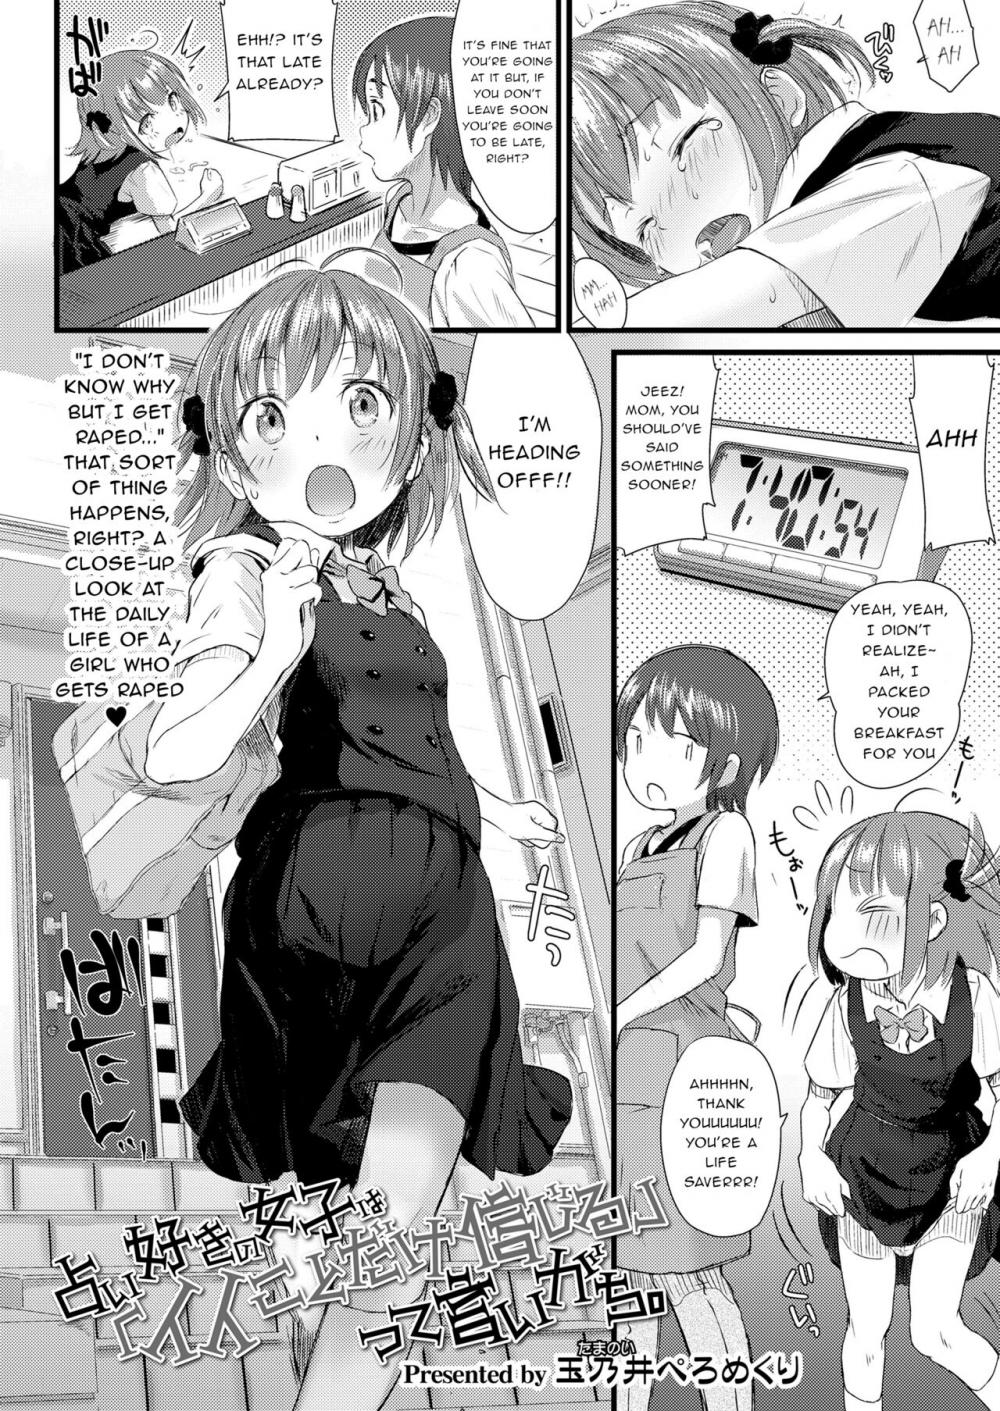 Hentai Manga Comic-Girls Who Like Fortune-Telling Tend to Say,I Only Believe in Good Things-Read-2